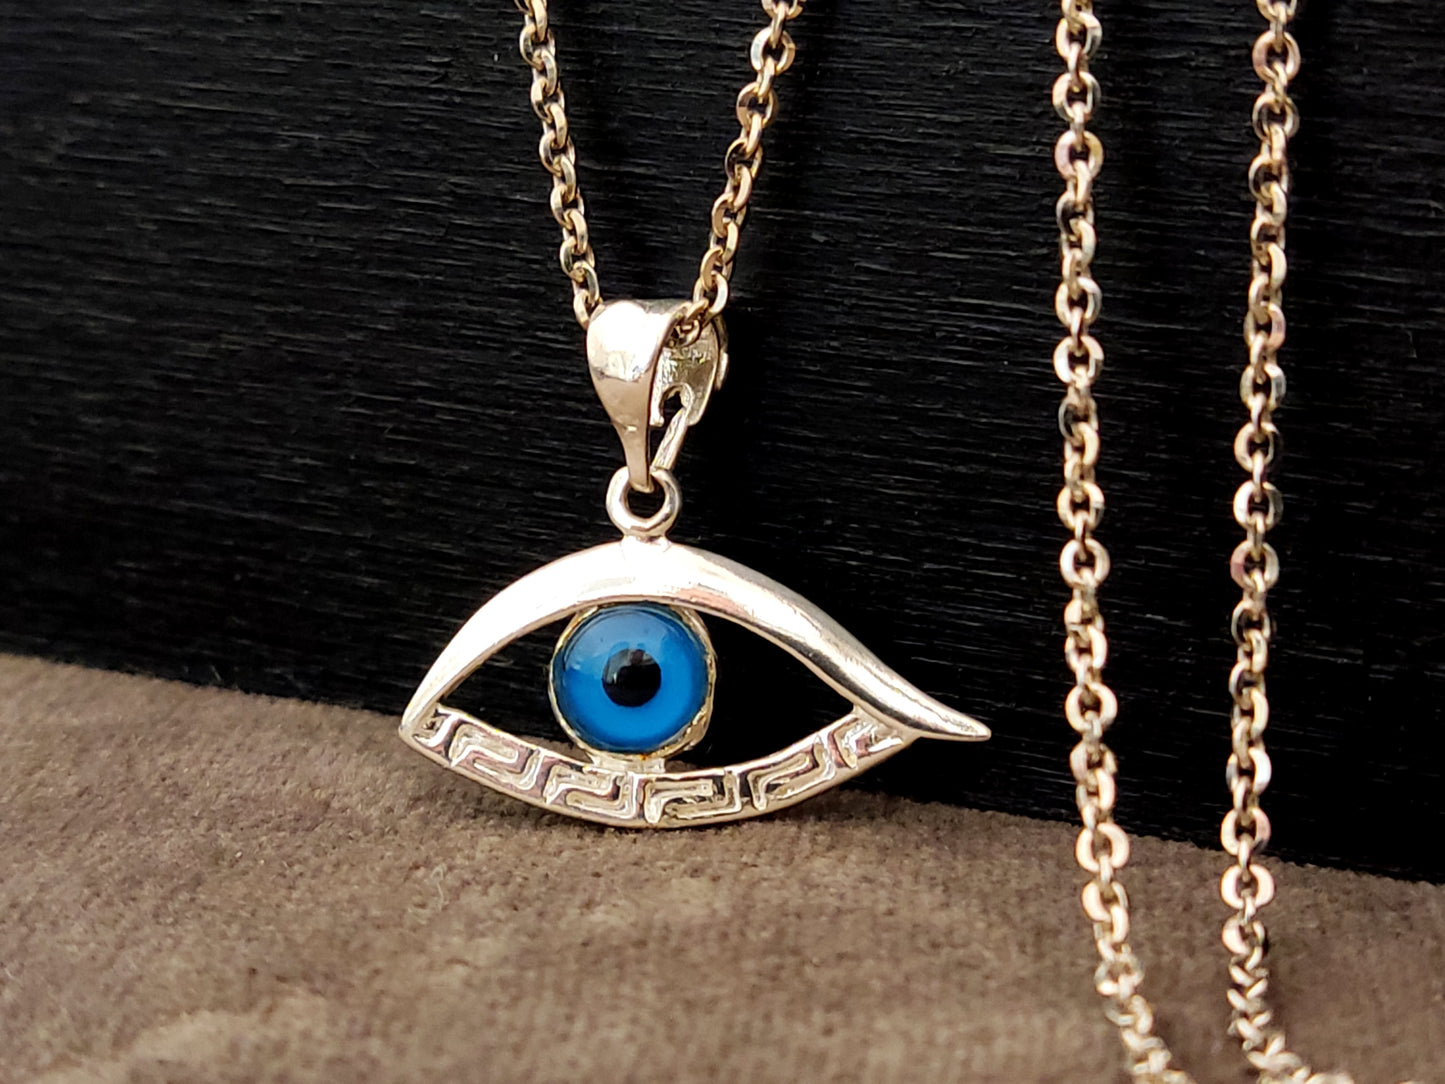 Evil eye shaped silver pendant with the Greek key on black and gray background.